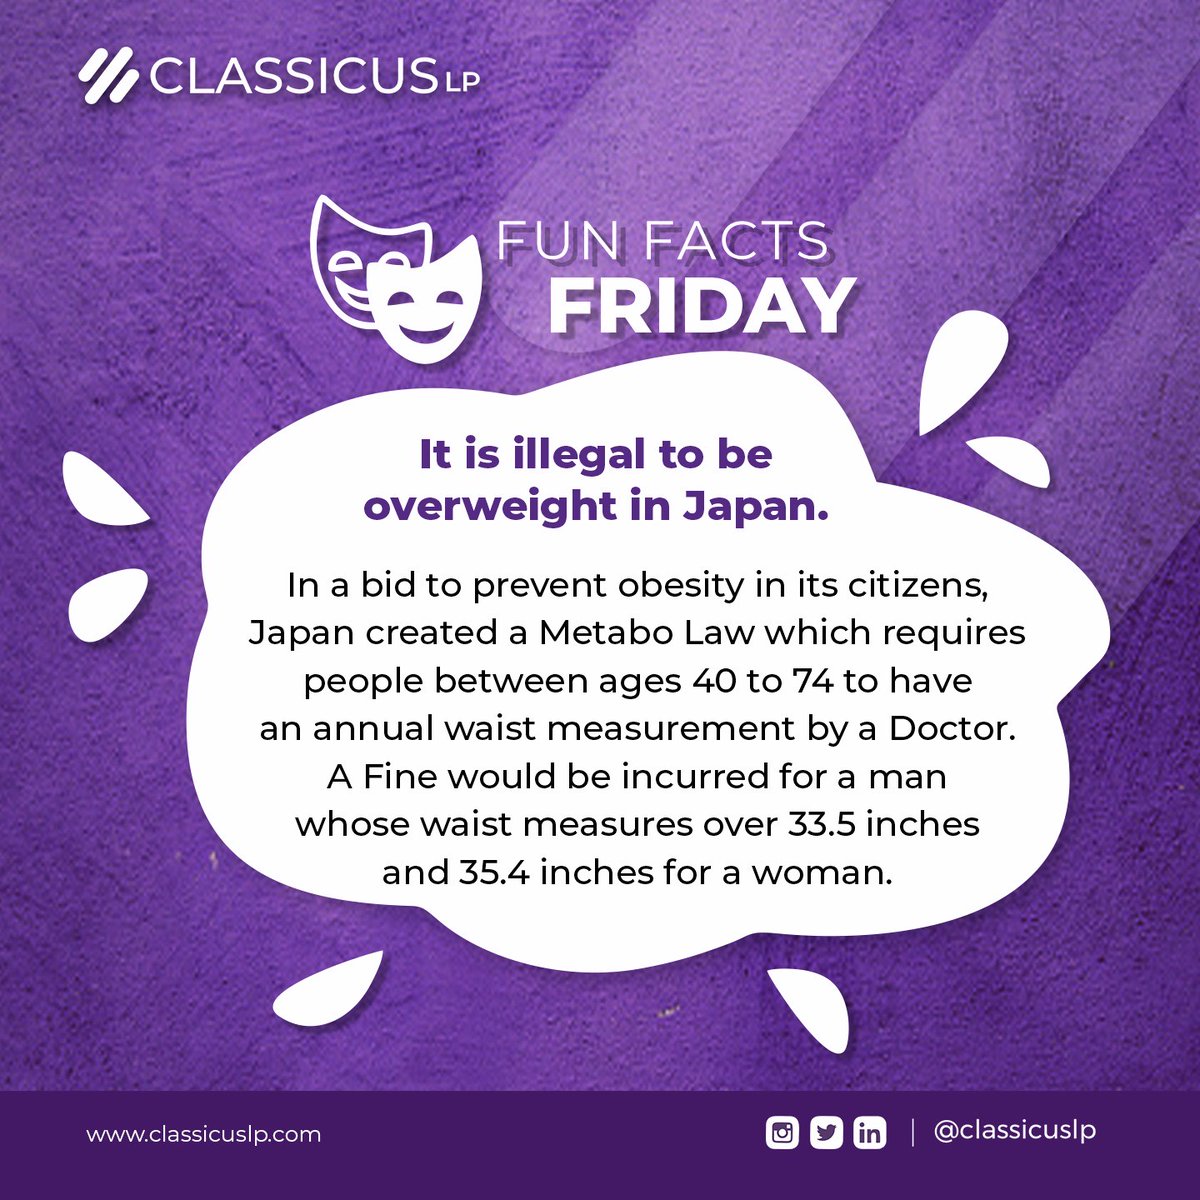 Different countries, different rules, different regulations which must all be followed strictly. #funnylaws #lawyers #health #funnypost #wierdfacts #instafacts #factsonly #funfacts #laughnigeria #wierdlaws #strangelaws #lawyers #lagoslawyers #solicitors #nigerianlawyers #